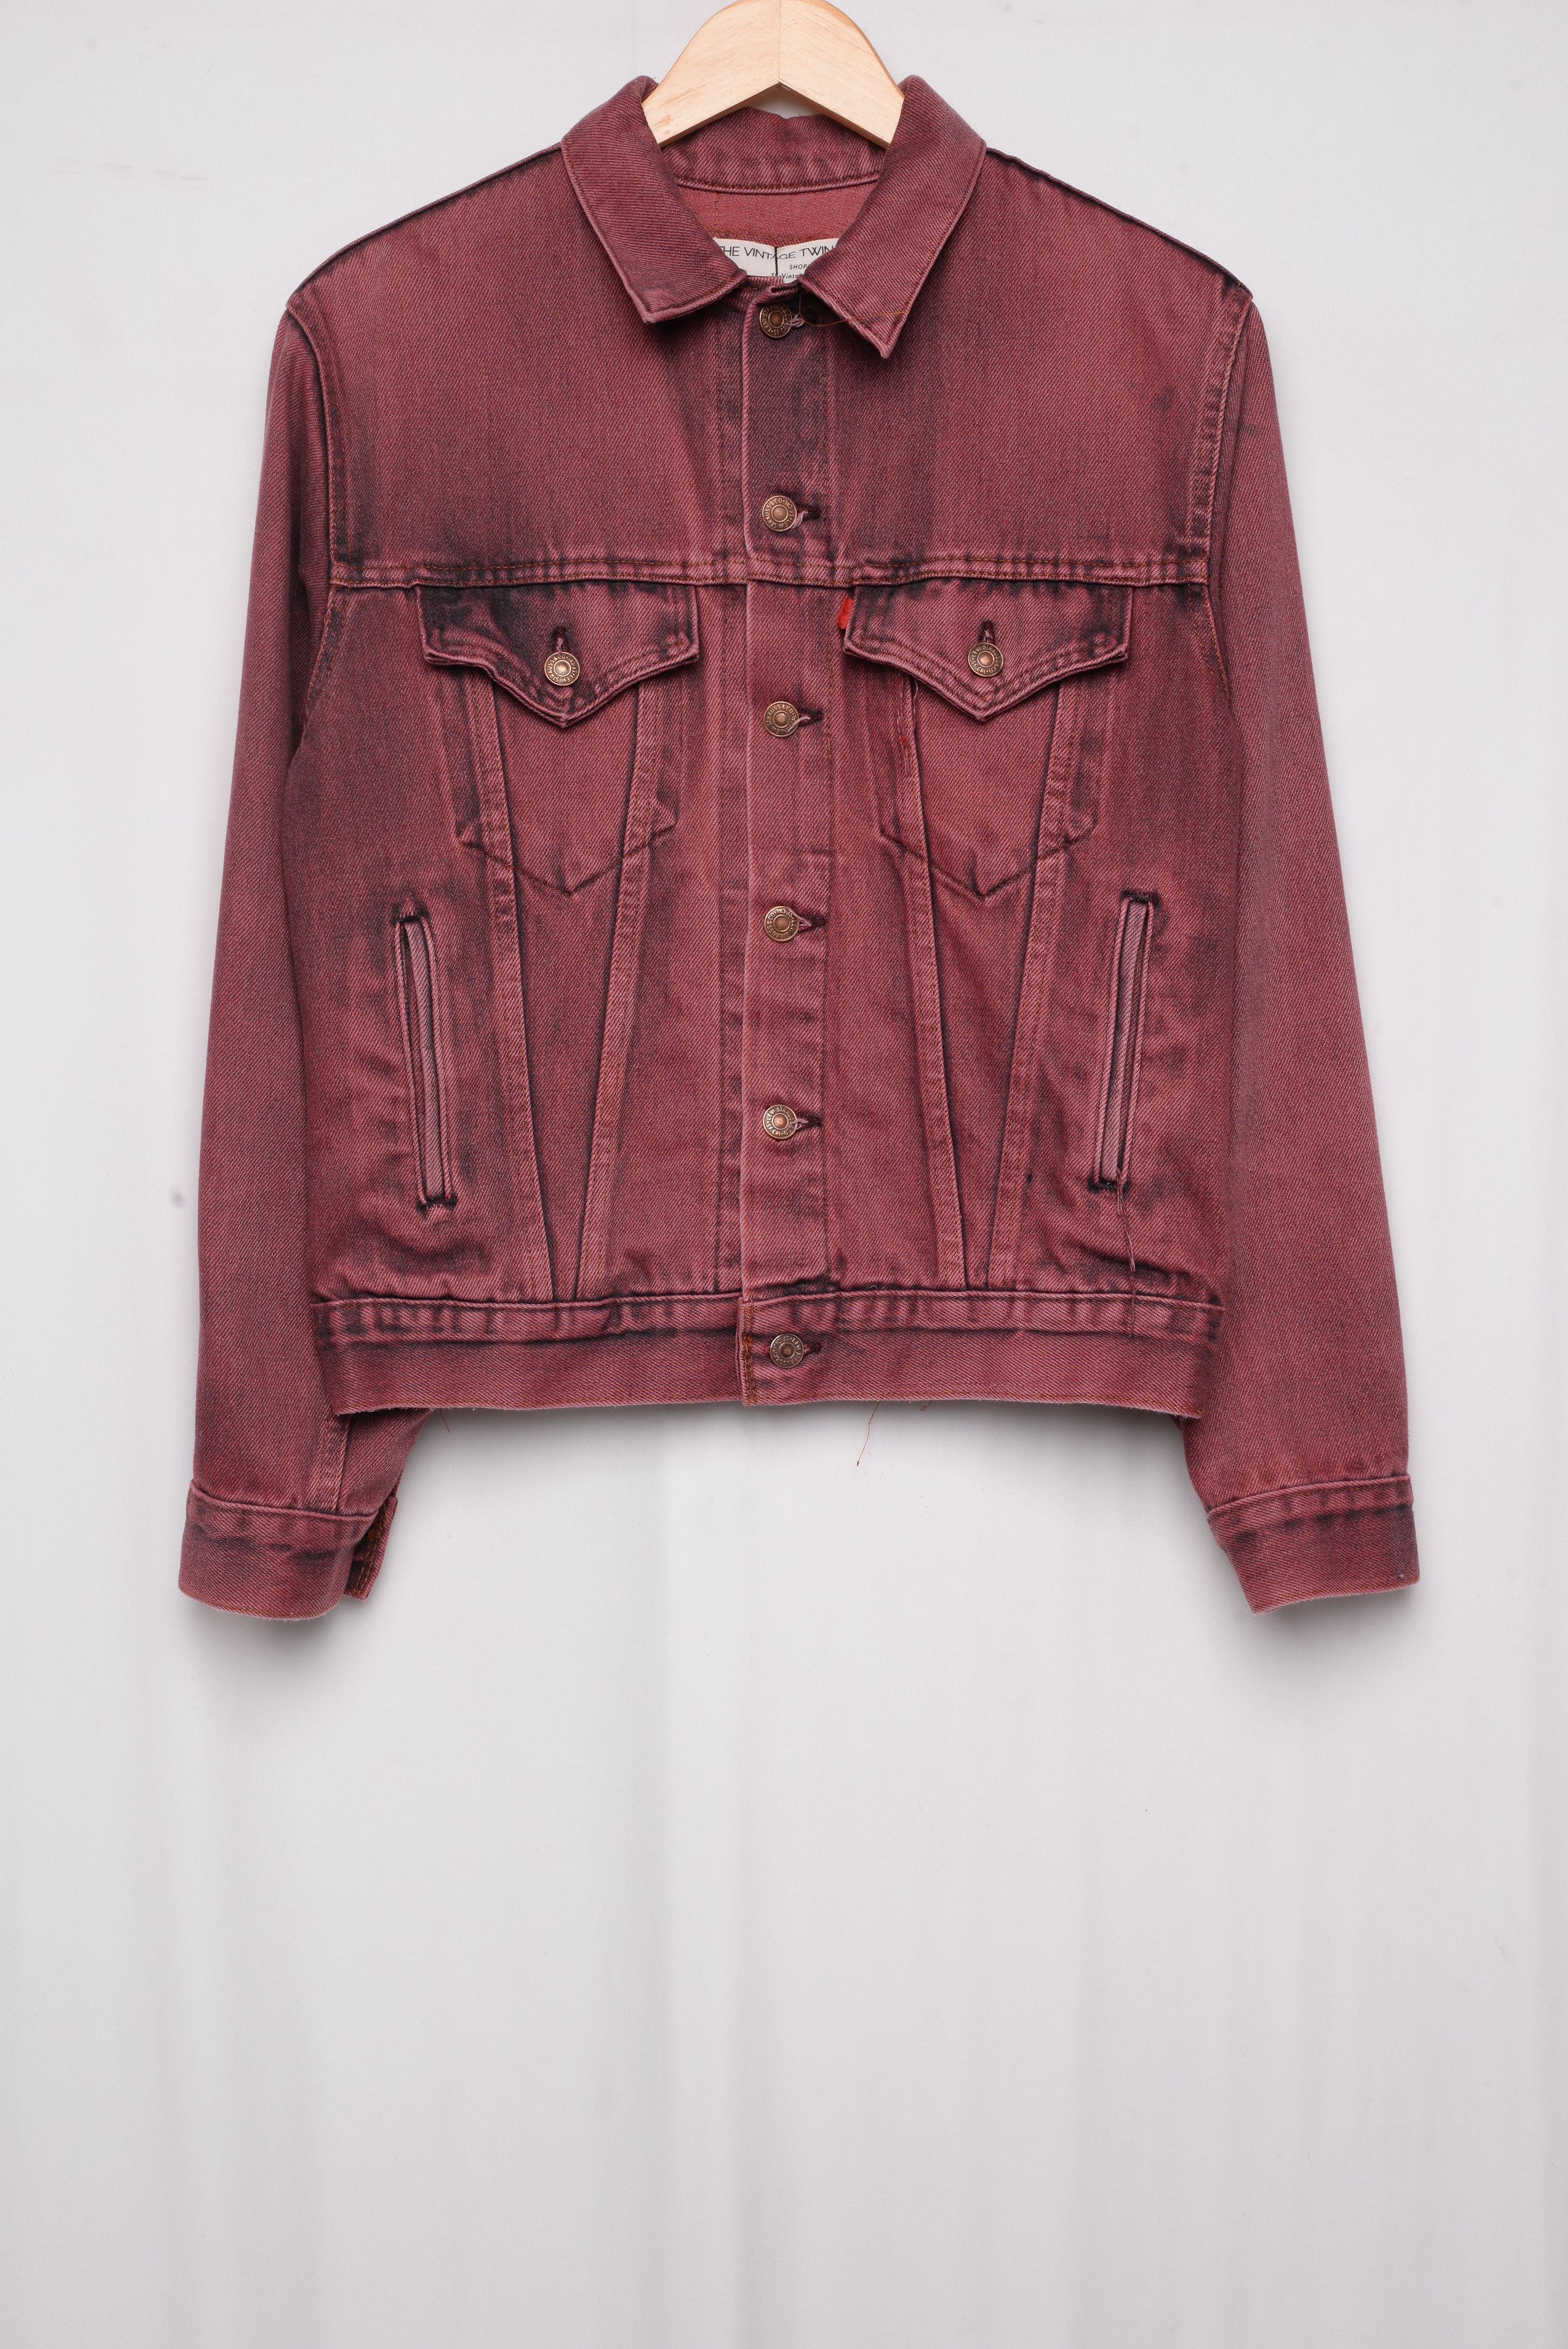 Levi's Red Denim Jacket Free Shipping - The Vintage Twin